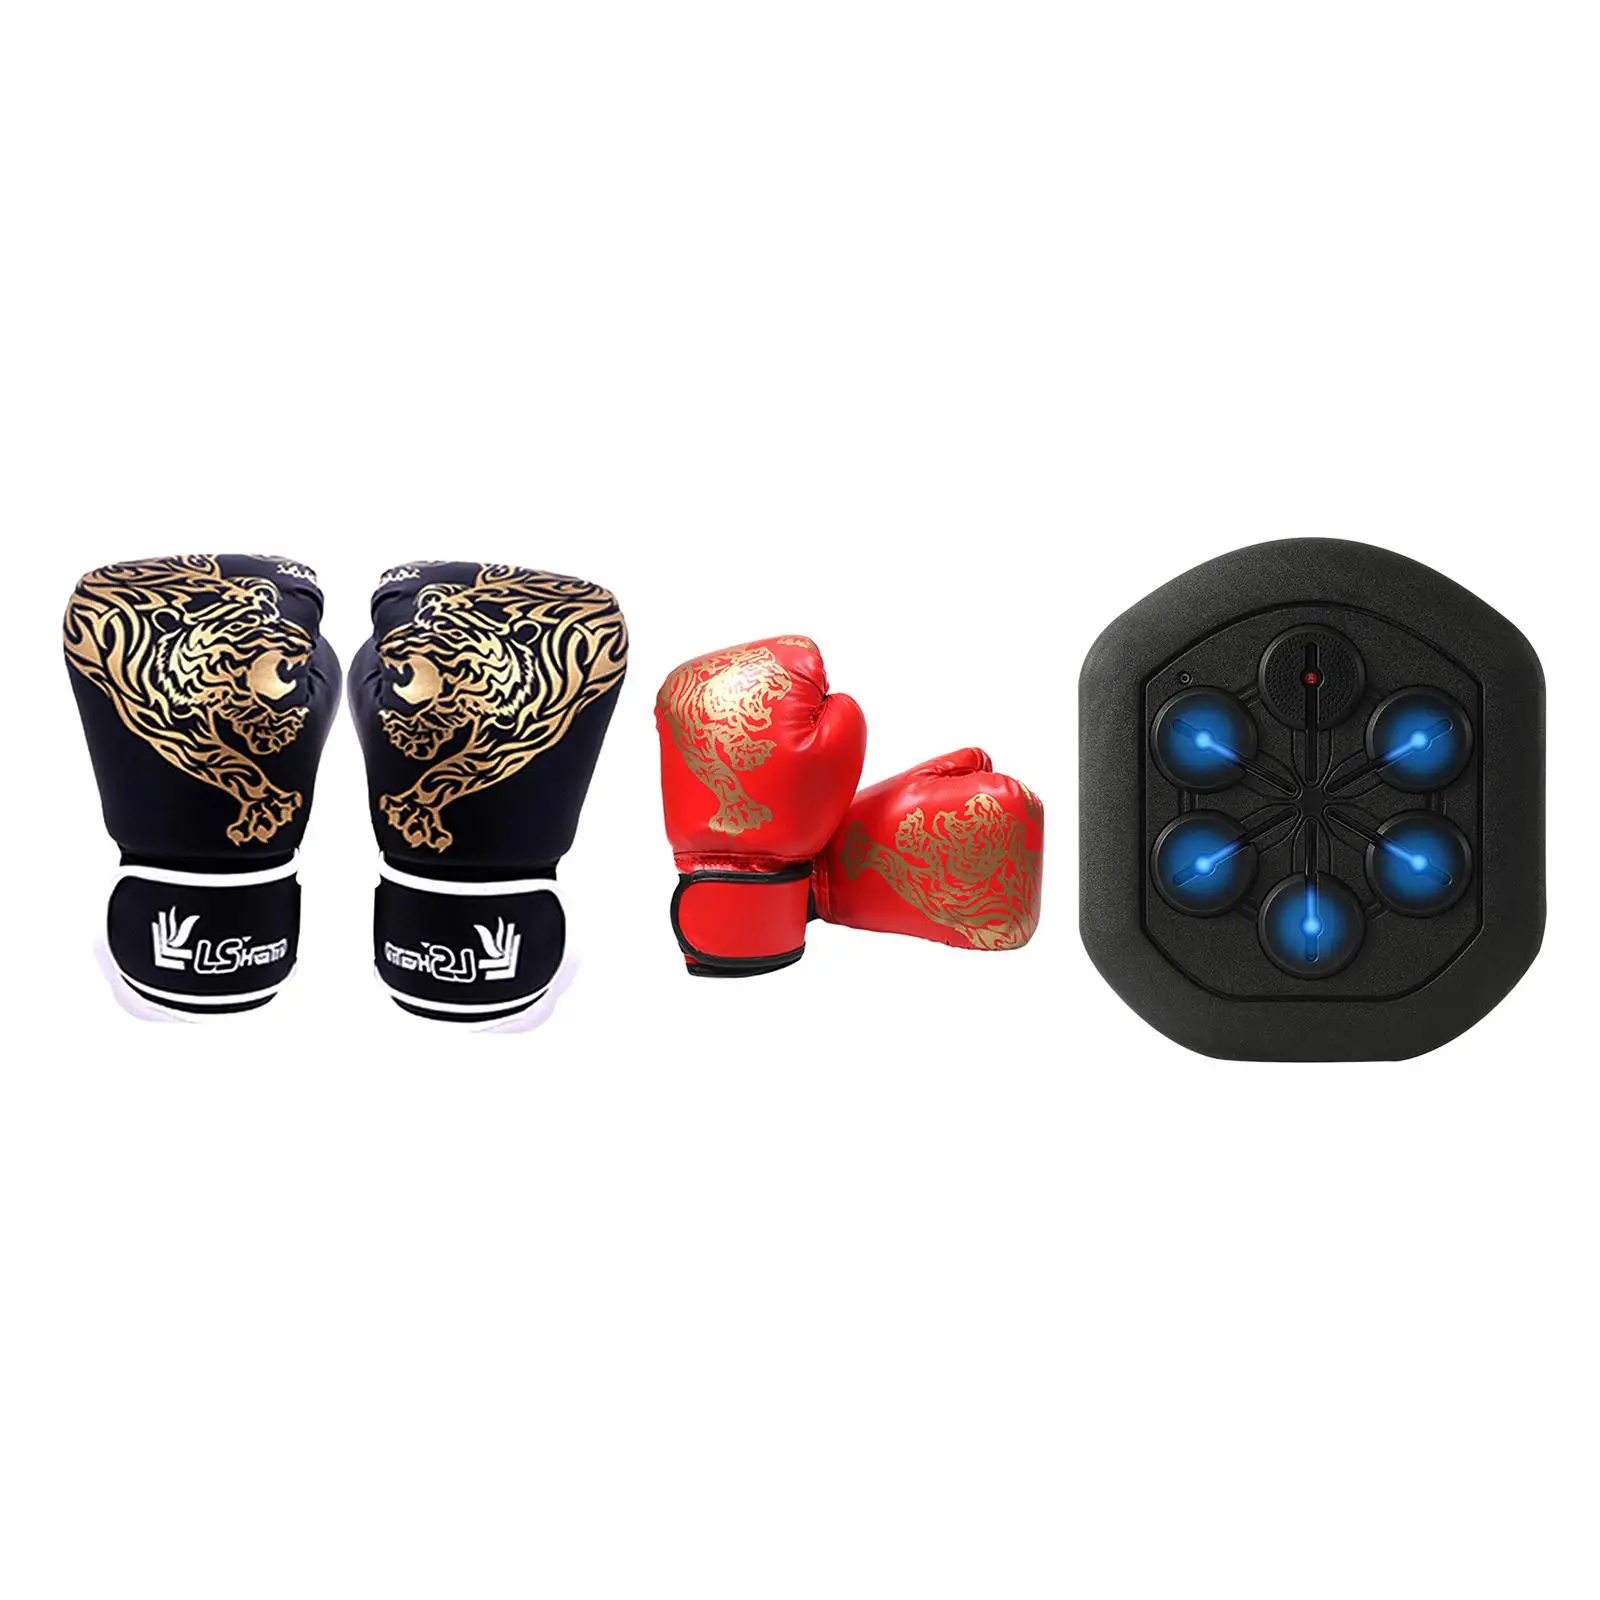 Music Boxing Wall Target Boxing Practice Reaction Target Punching Pad for Kids Adults Training Equipment Machine Household